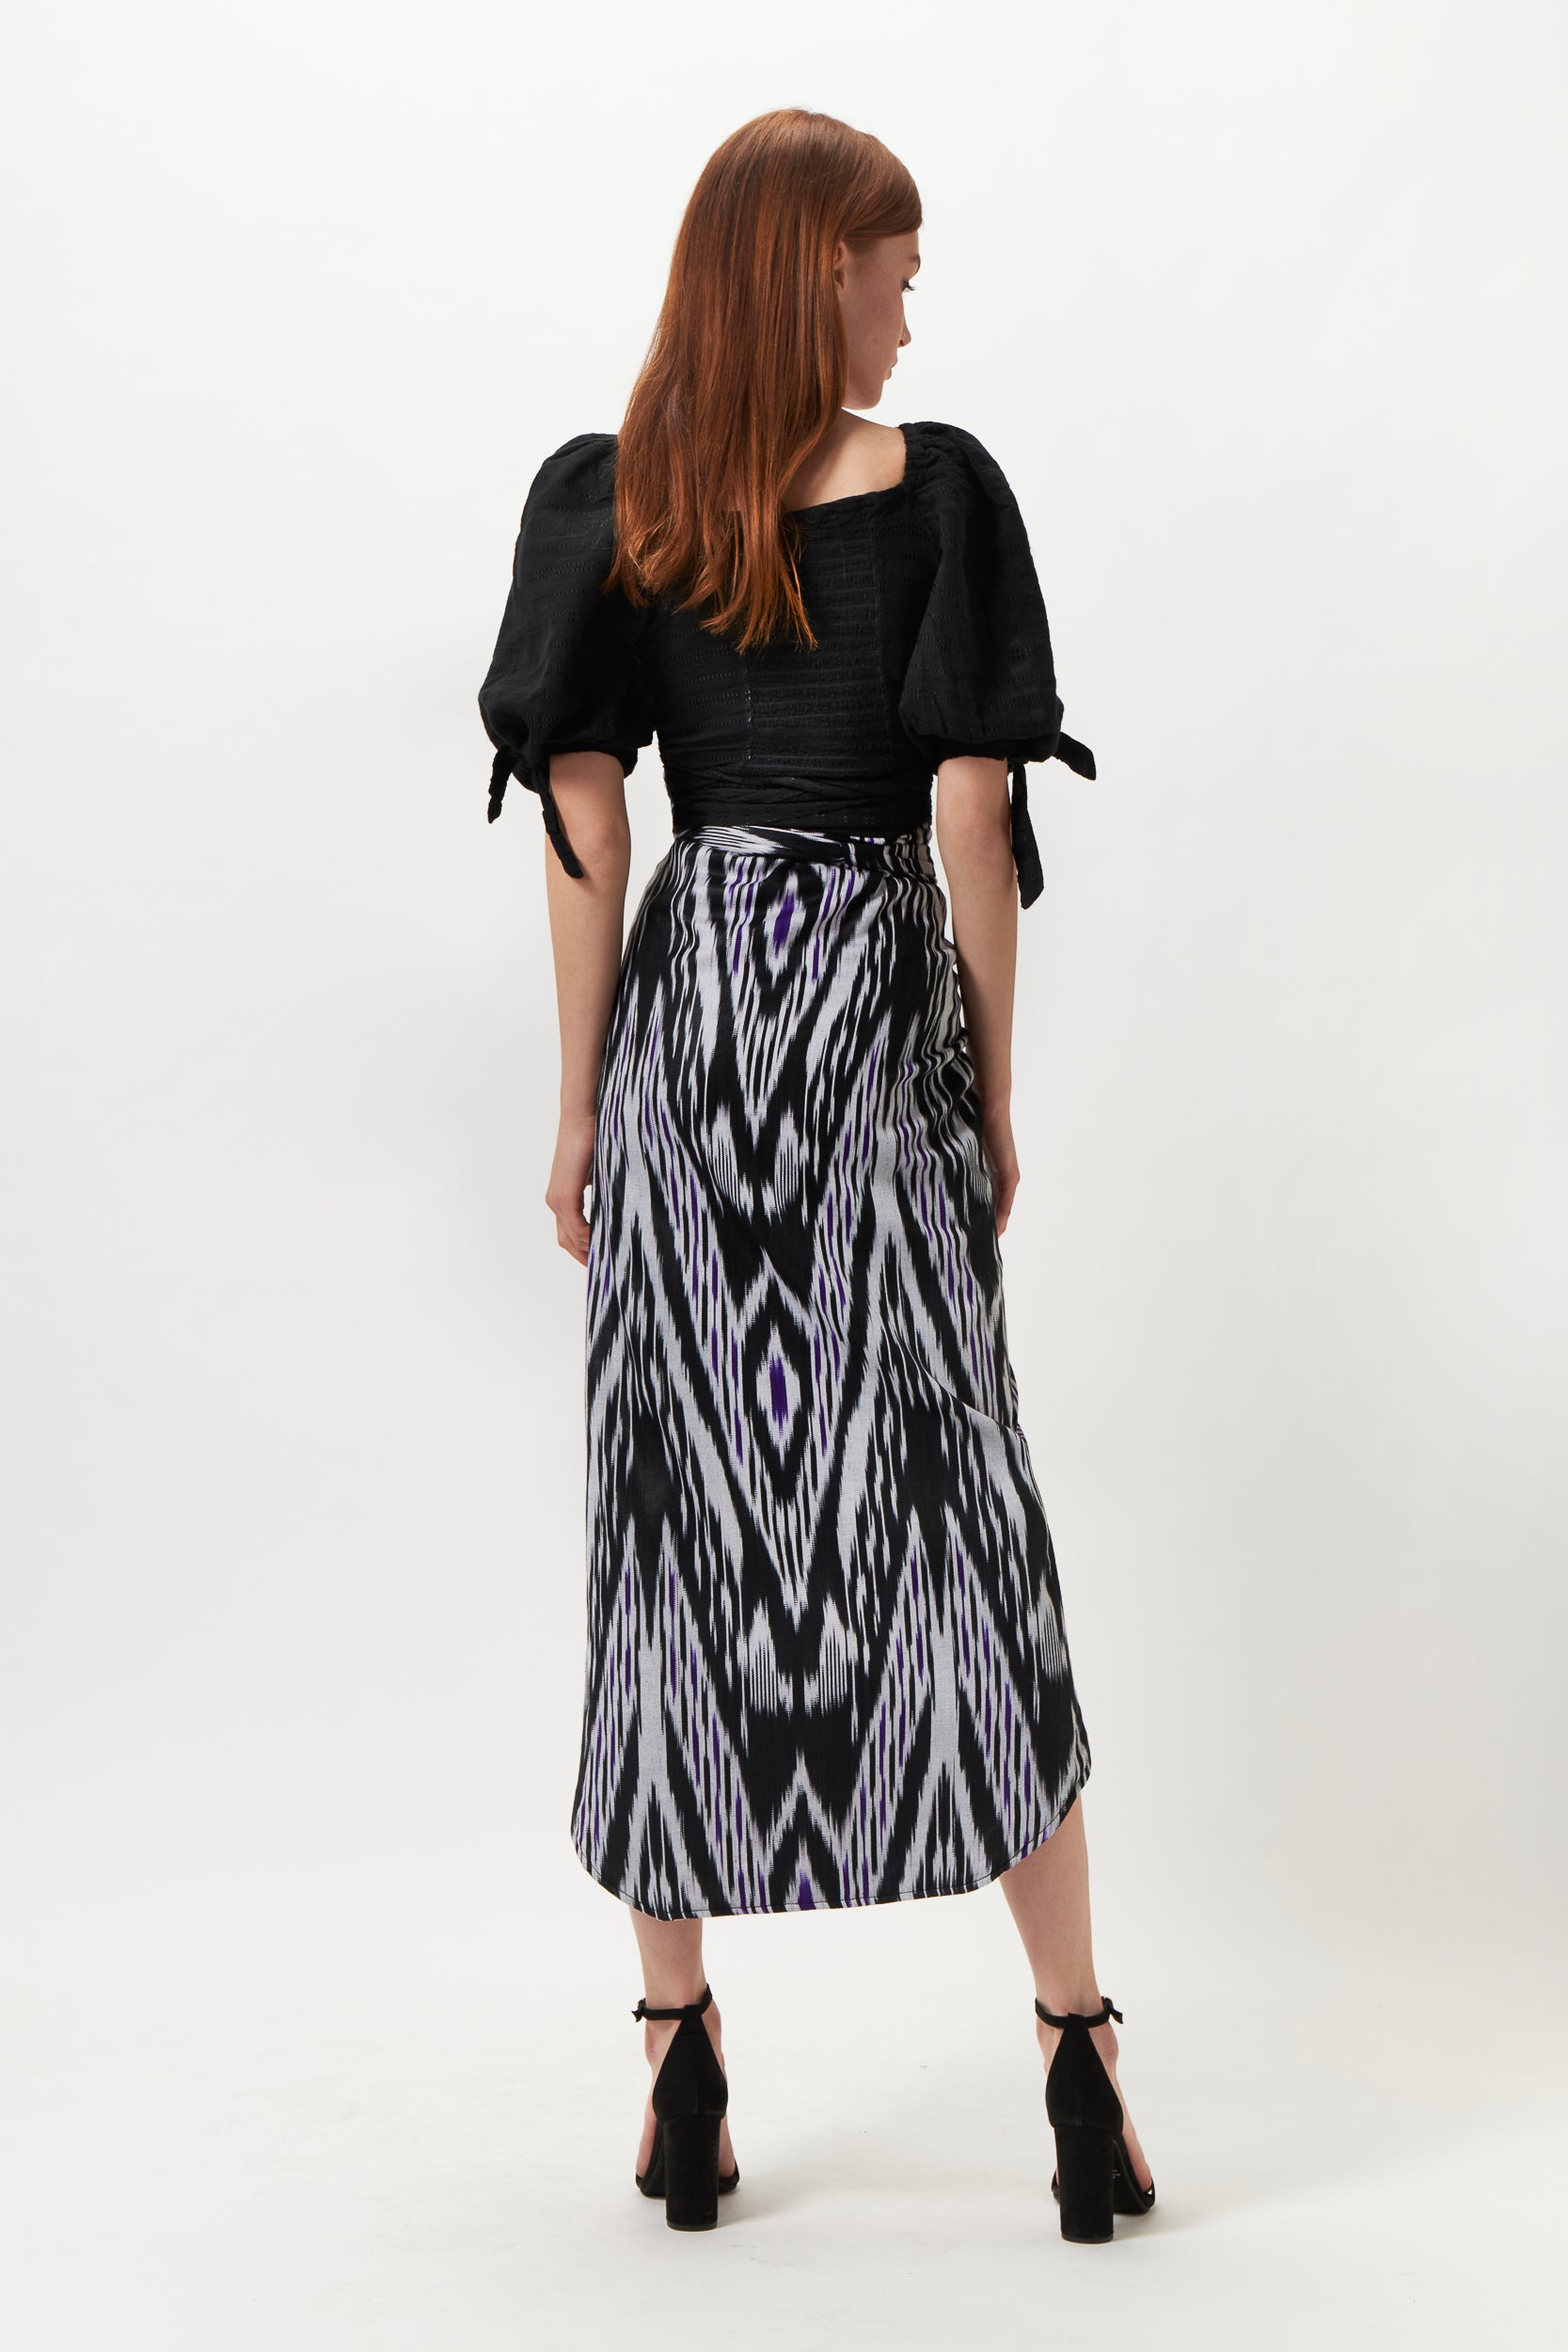 ZINA ONE OF A KIND DOUBLE-FACED IKAT SKIRT